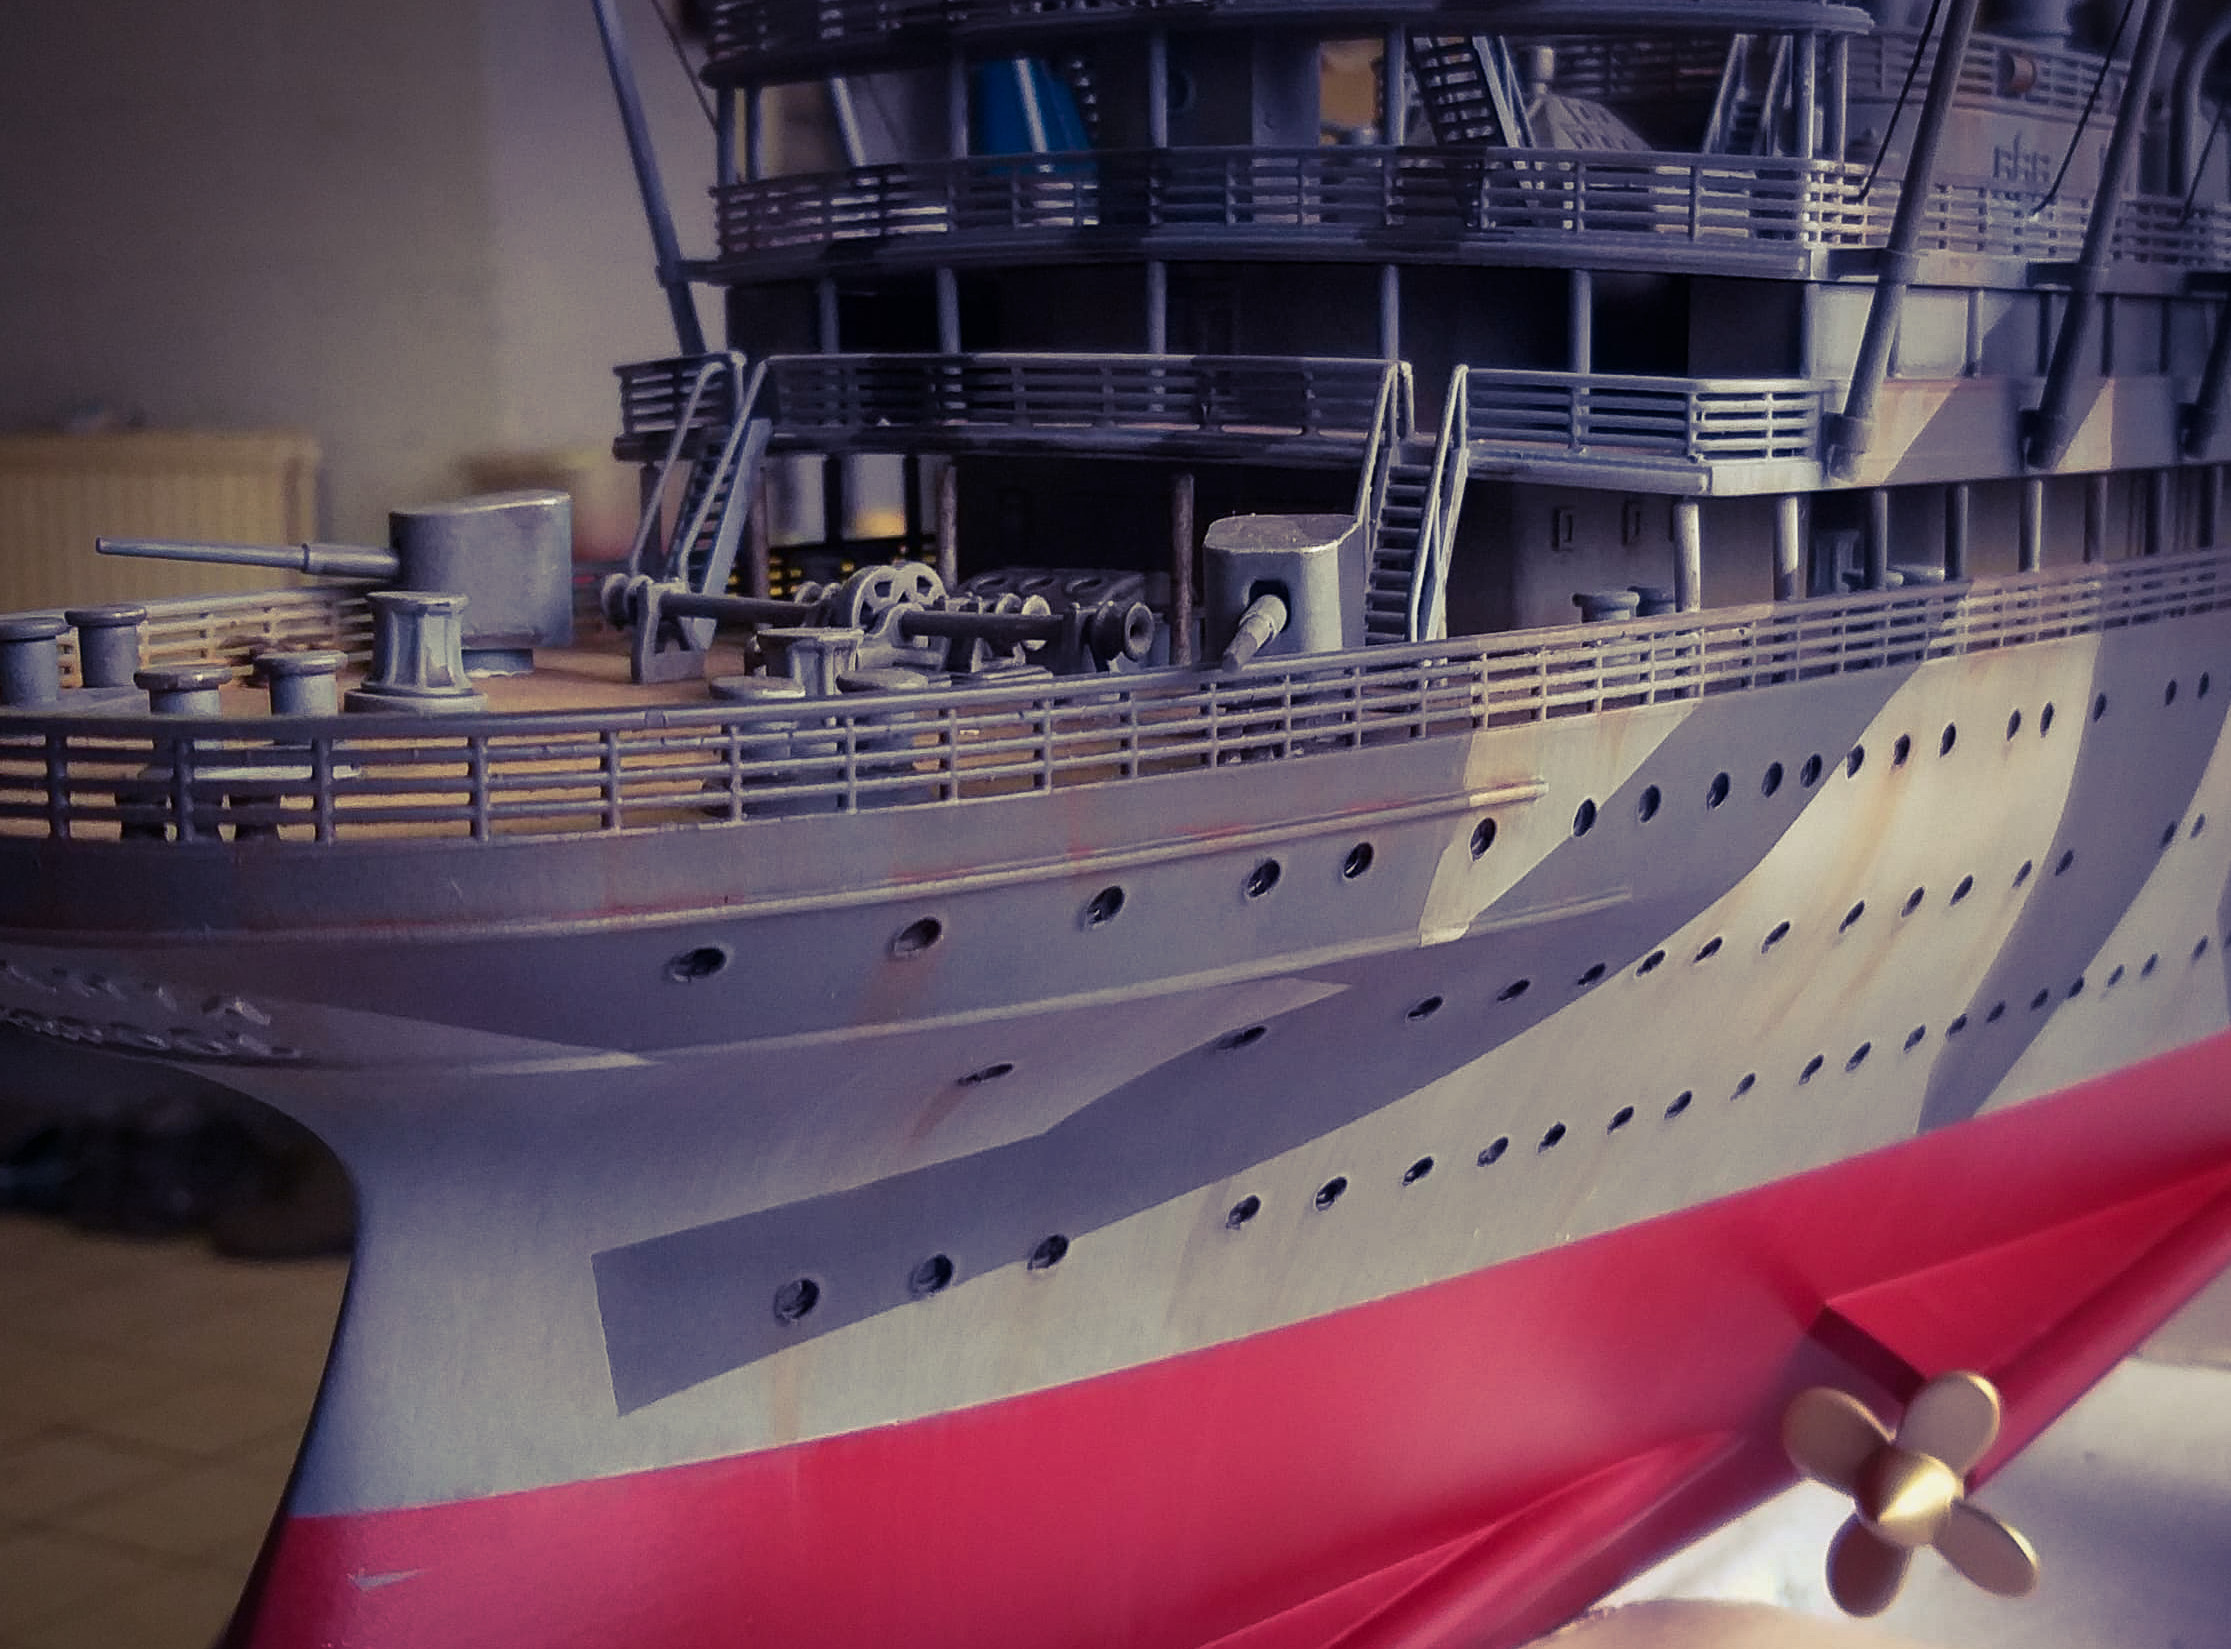 3D-Printed Replica of a WWI Ship | 3D Printing |